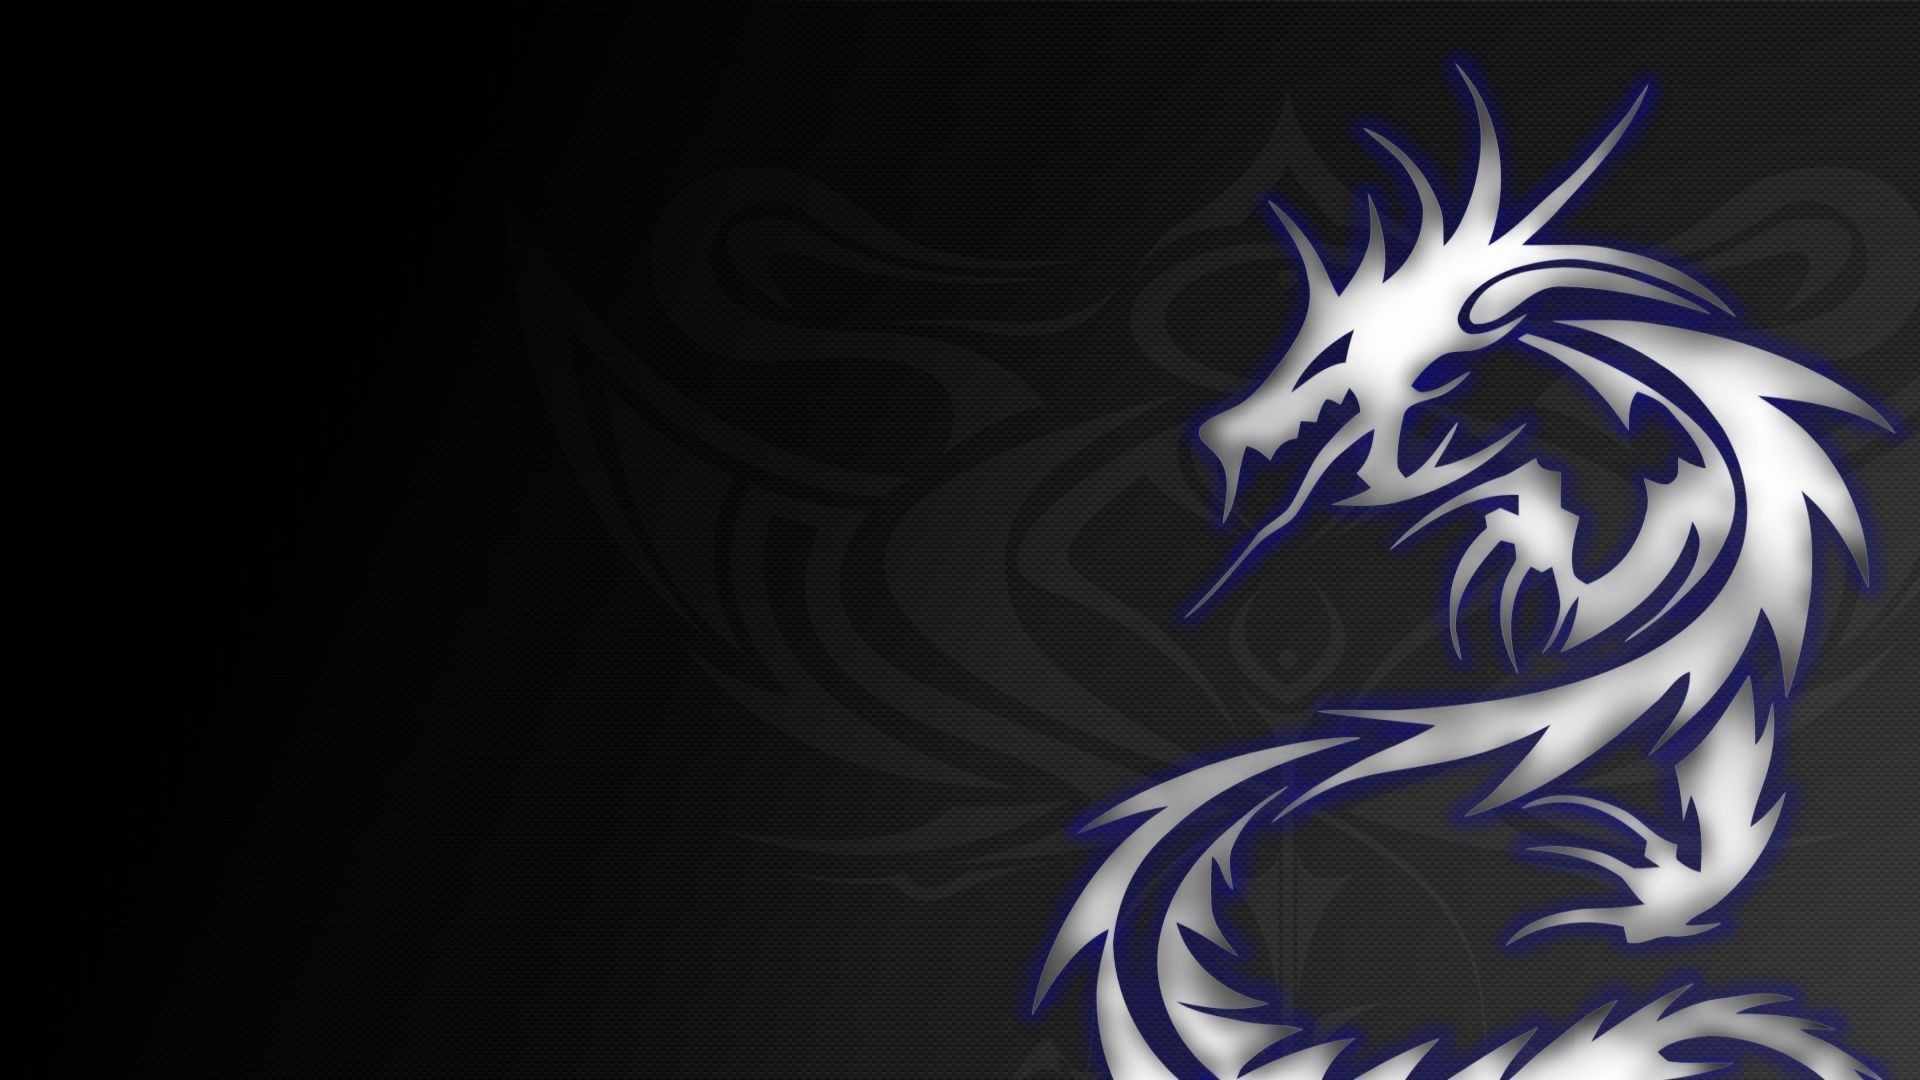 Blue Dragon Windows wallpapers and images   wallpapers